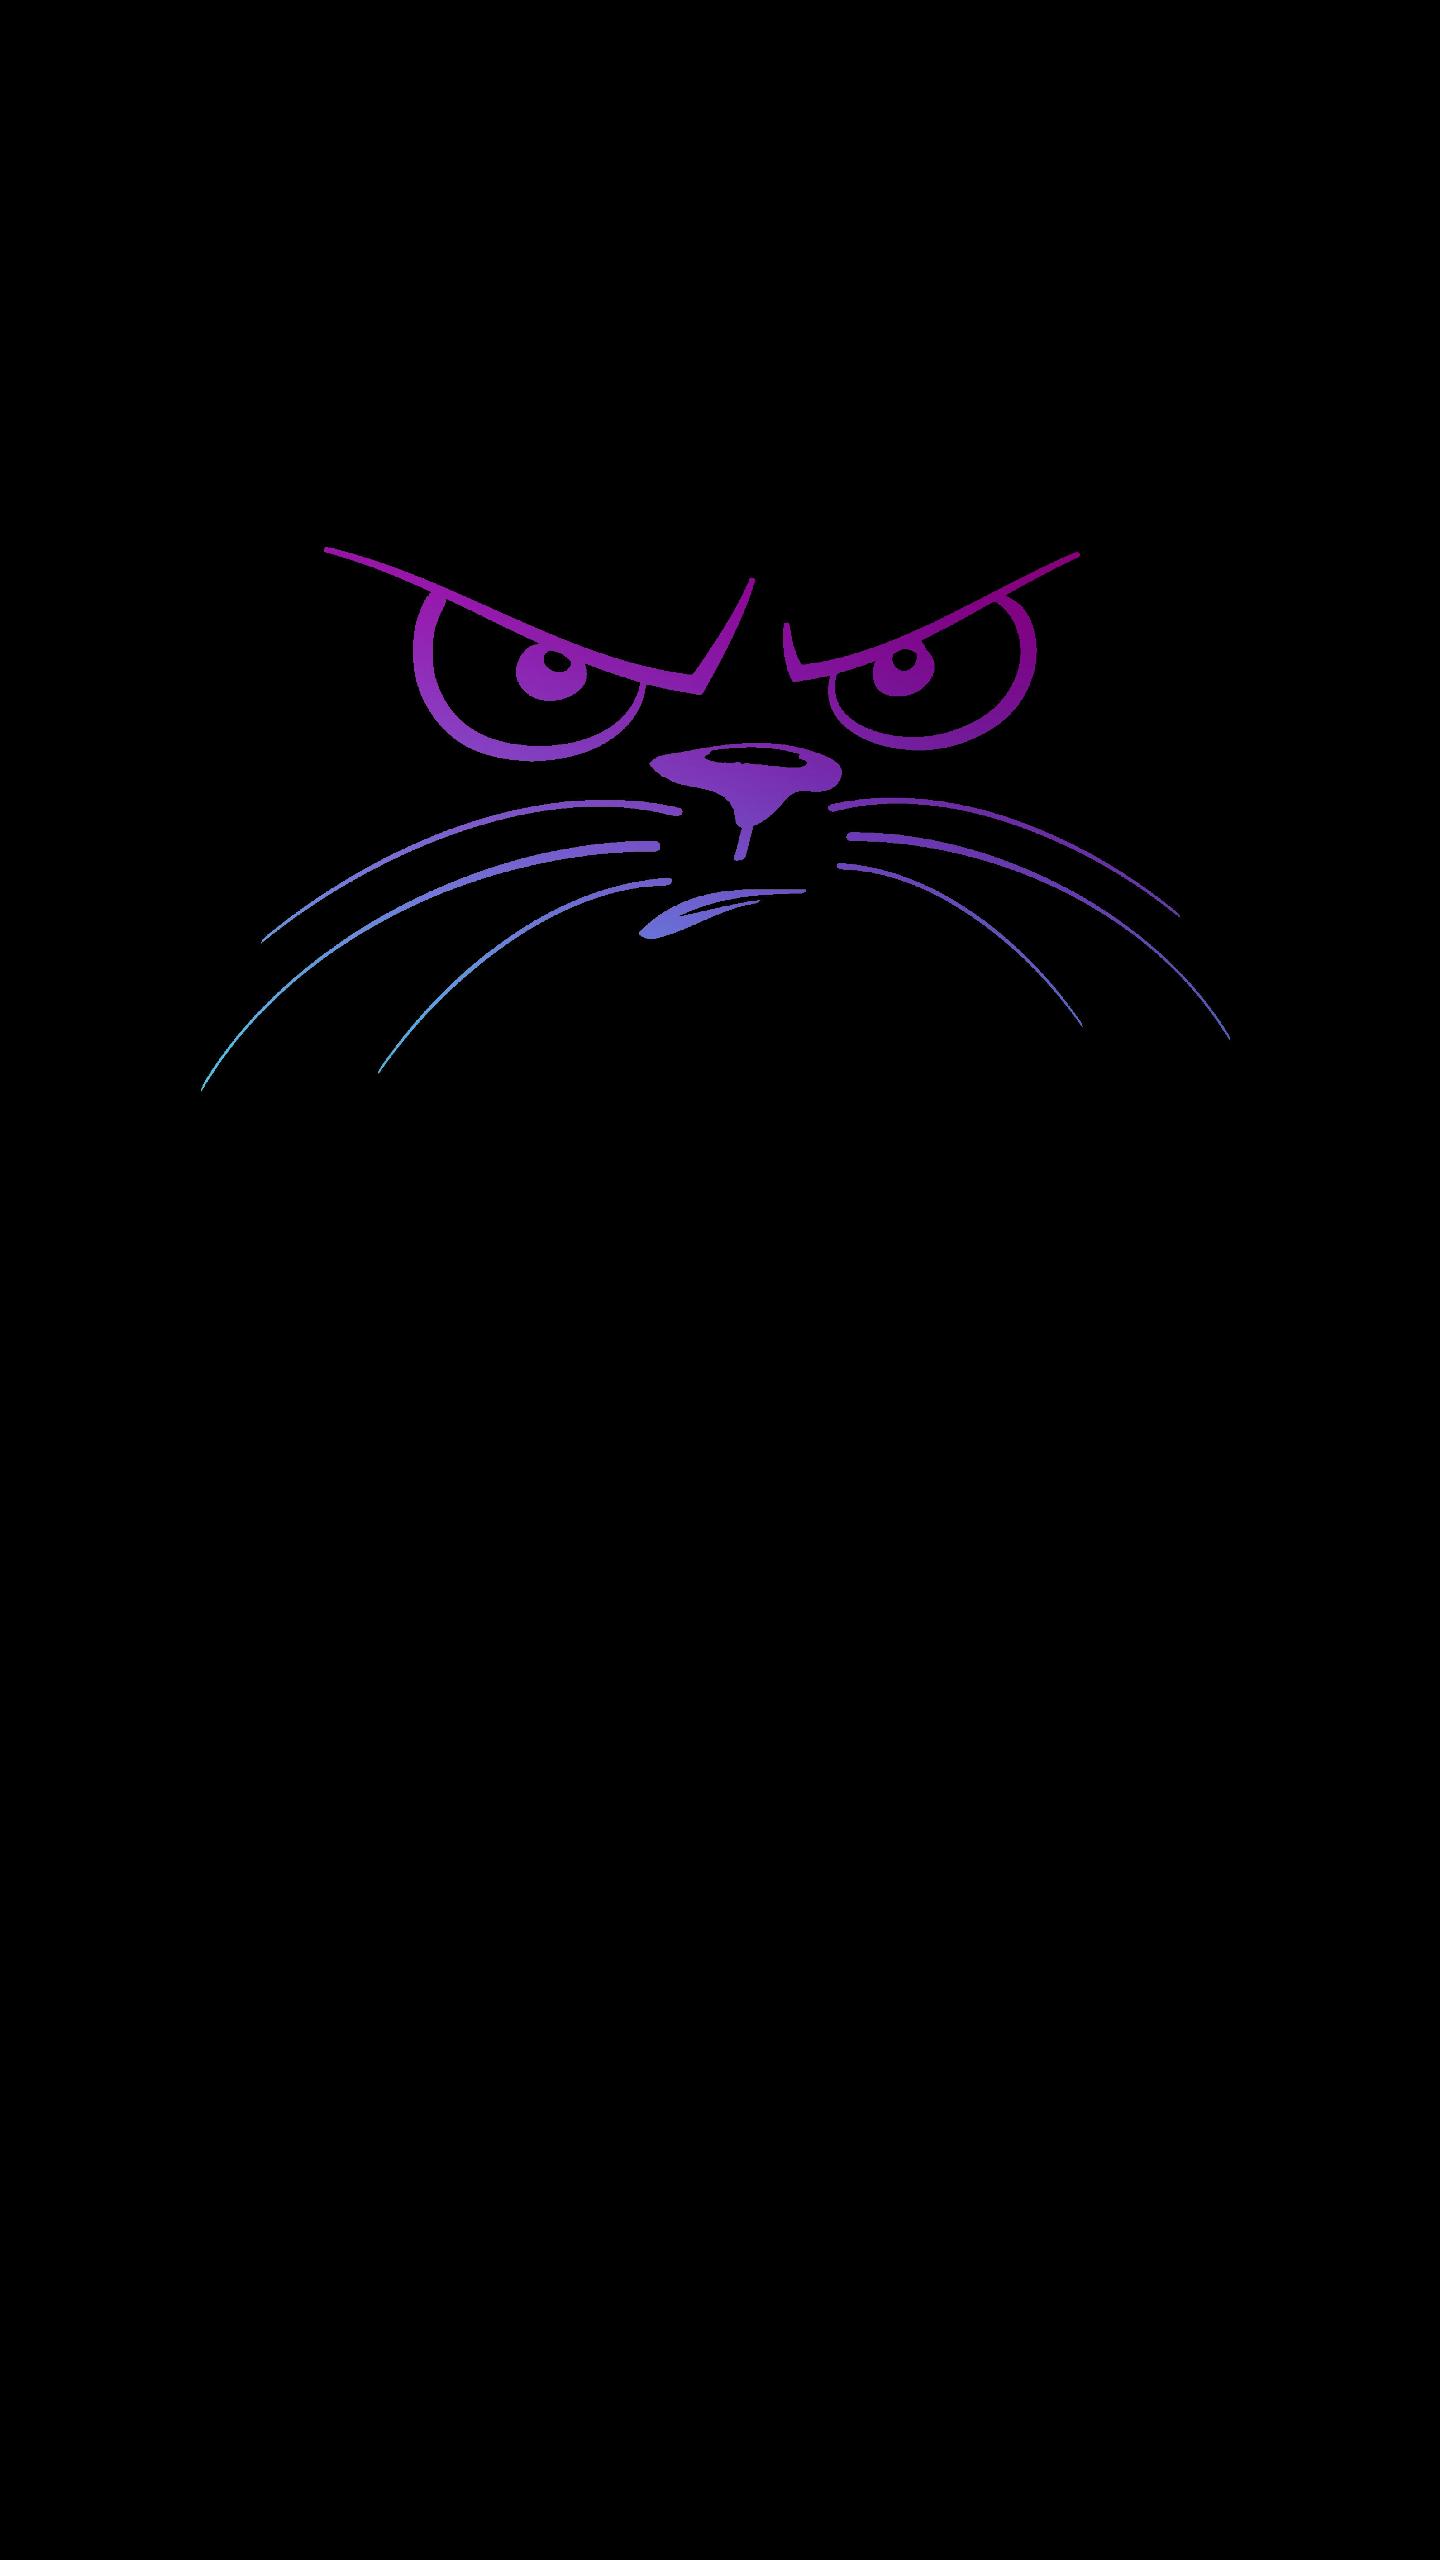 Black Cat Wallpaper For iPhone  I Photograph Black Shelter Cats